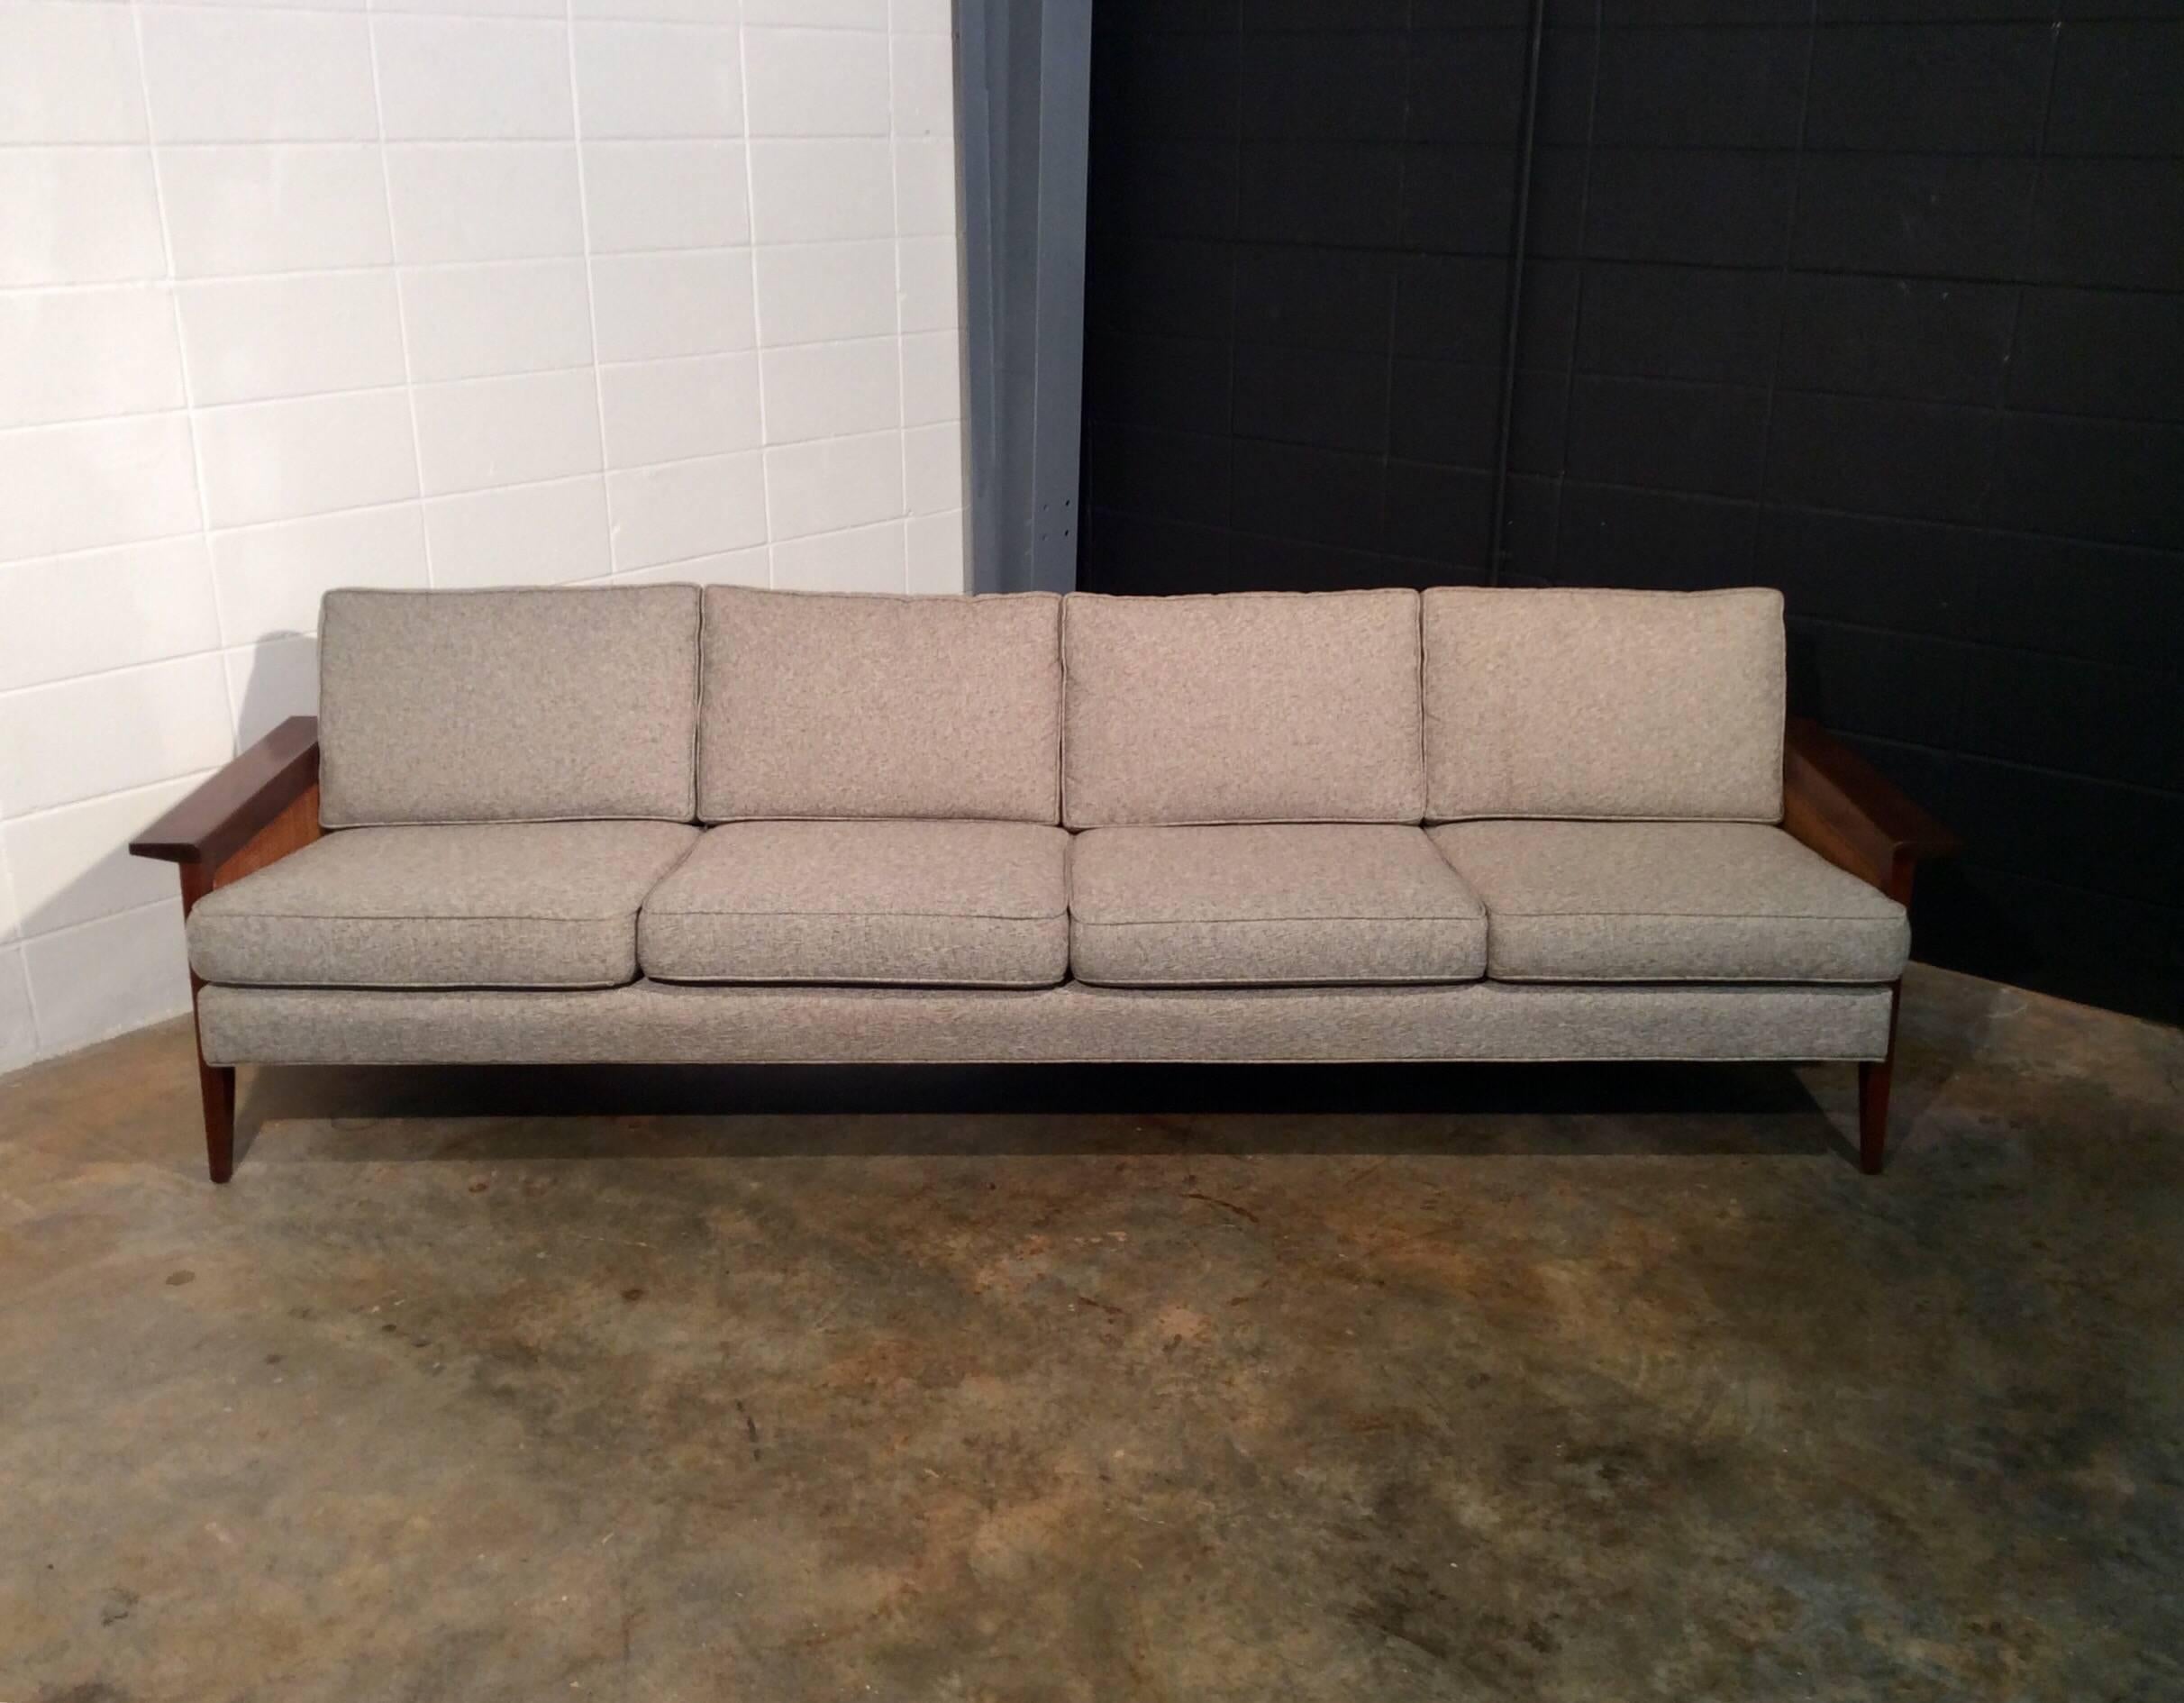 Mid-20th Century Unique and Restored Mid-Century Modern Sofa by Iconic Galloways of Tampa